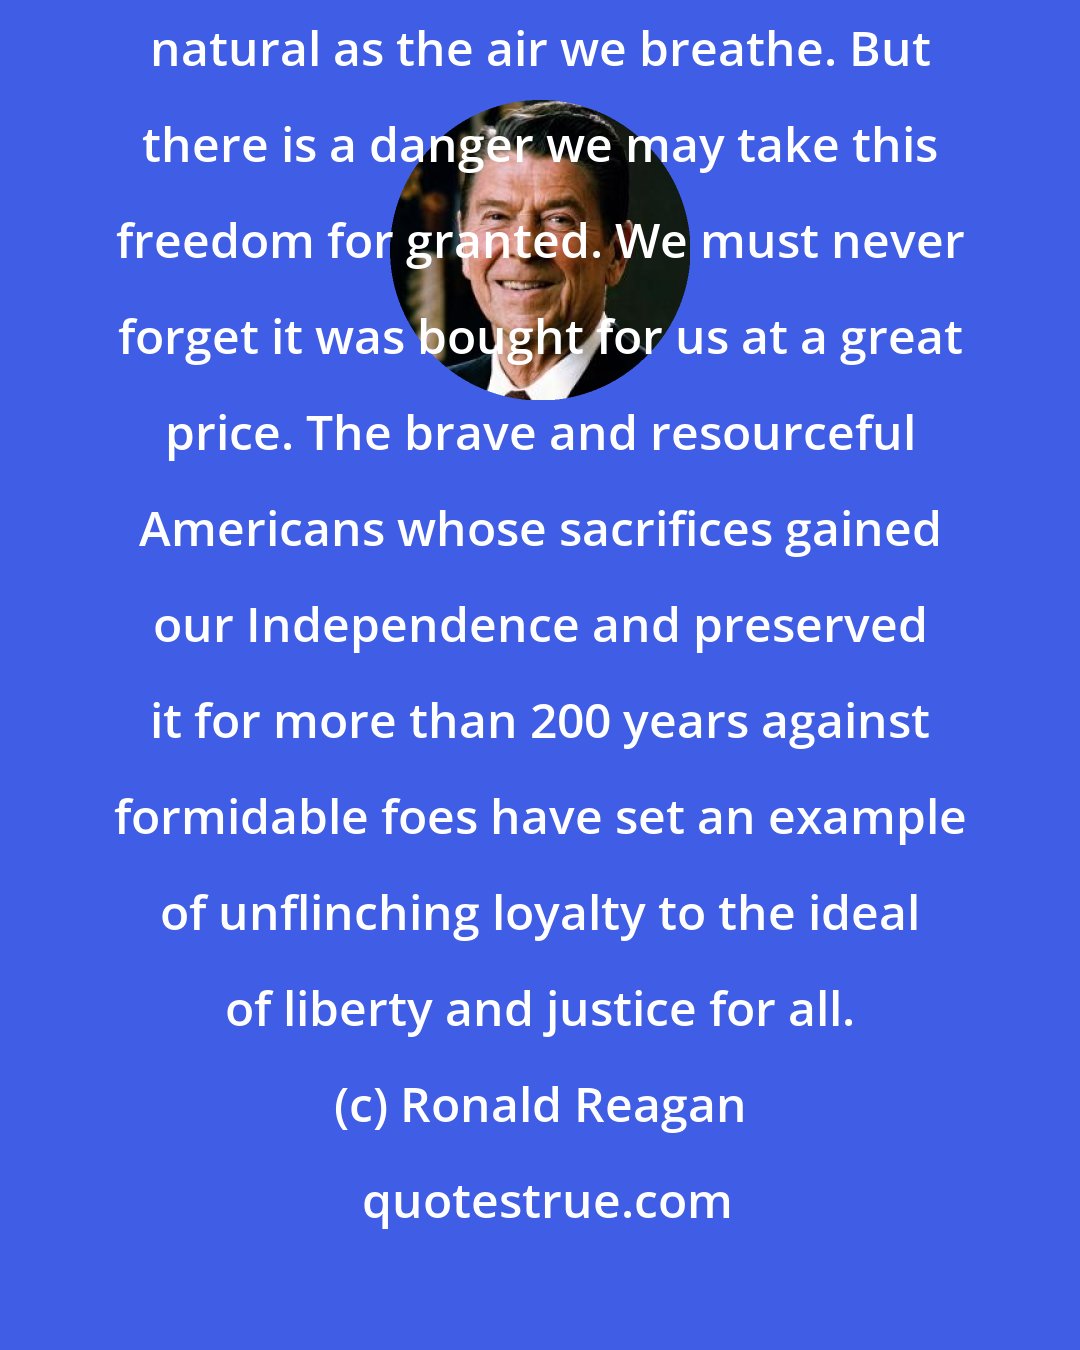 Ronald Reagan: The freedom of thought and action we Americans enjoy today seems as natural as the air we breathe. But there is a danger we may take this freedom for granted. We must never forget it was bought for us at a great price. The brave and resourceful Americans whose sacrifices gained our Independence and preserved it for more than 200 years against formidable foes have set an example of unflinching loyalty to the ideal of liberty and justice for all.